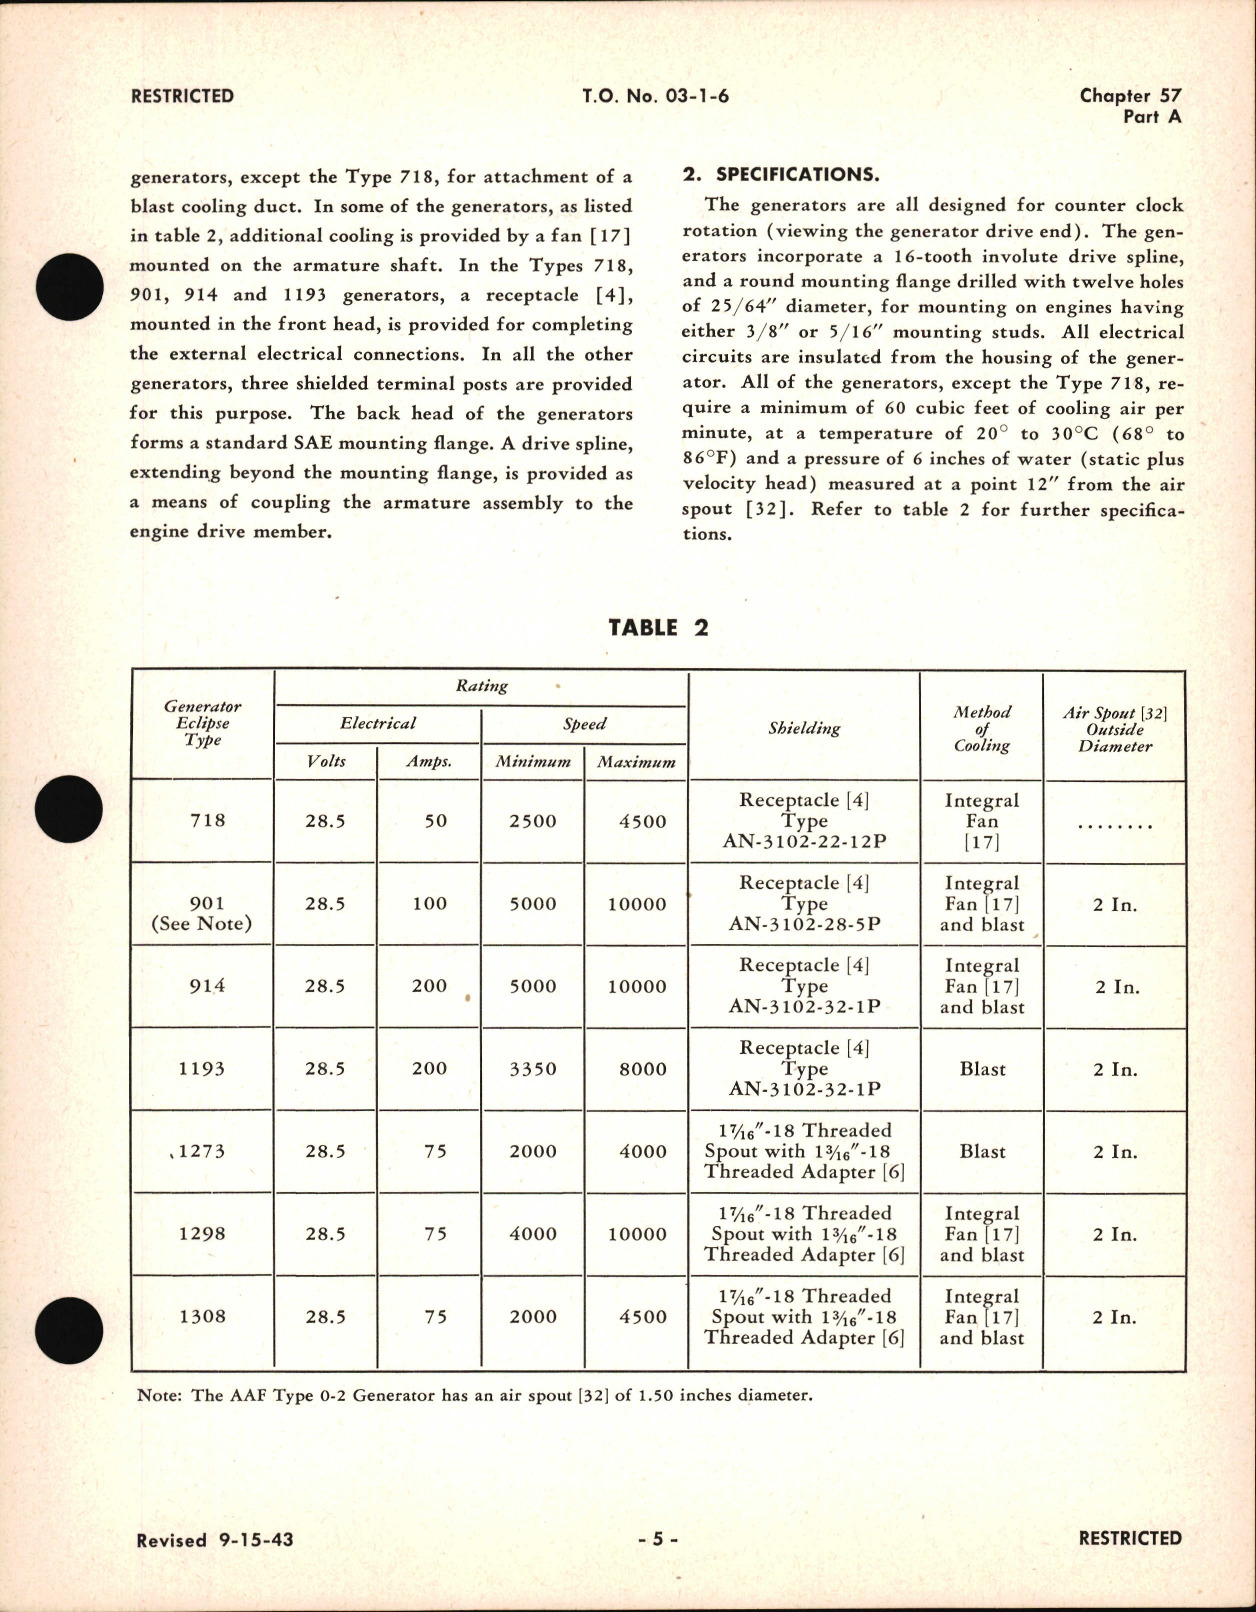 Sample page 5 from AirCorps Library document: Operating and Service Instructions for Engine Driven Single Voltage High Field Current D.C. Generators, Ch 57 Part A